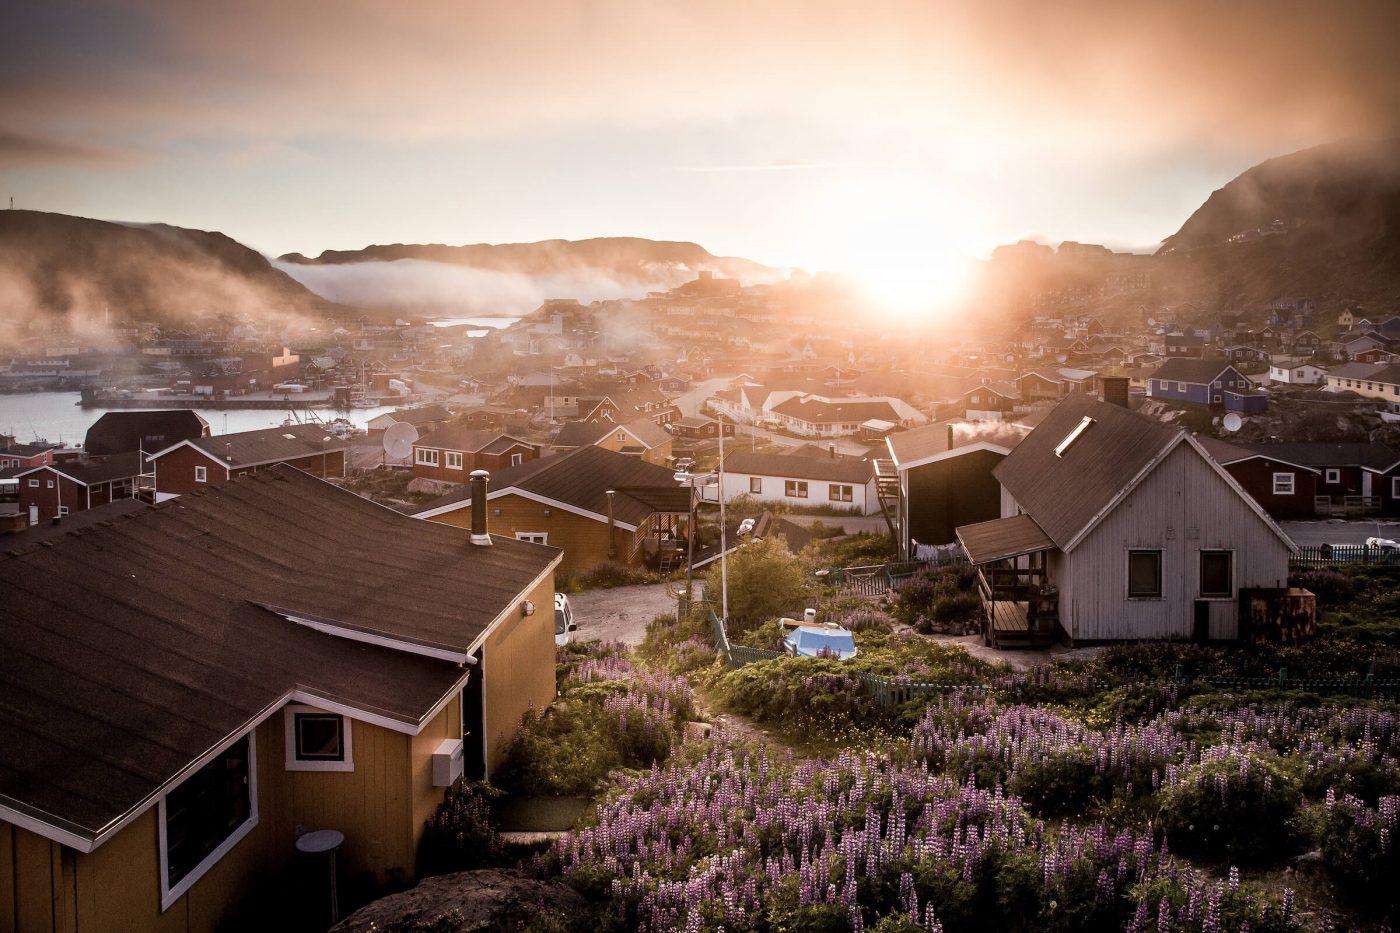 Sunset over Qaqortoq in South Greenland. Photo by Mads Pihl